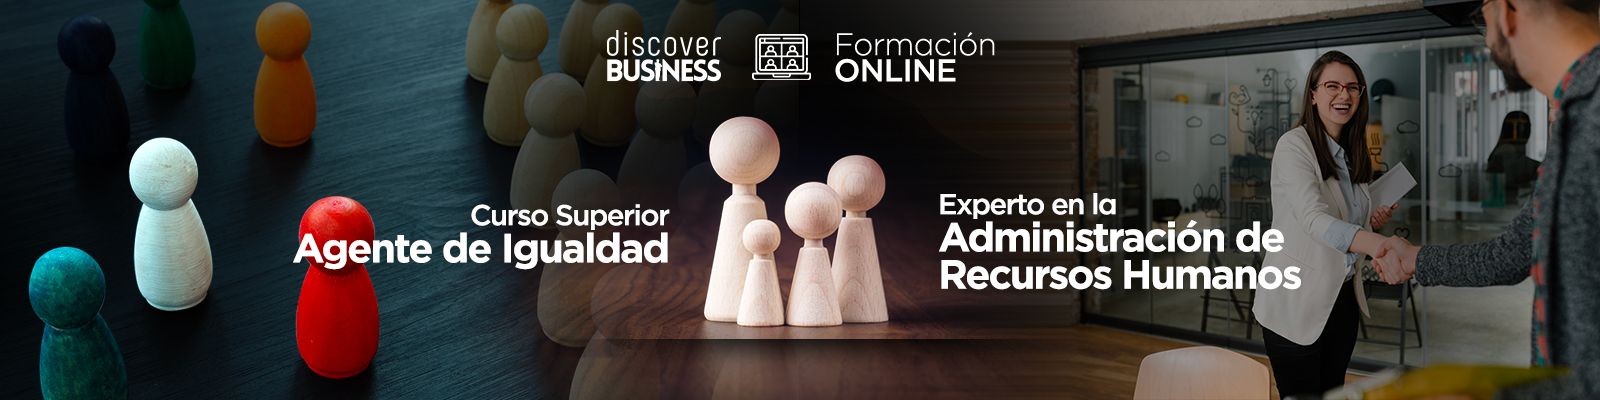 FP Online | Discover Business